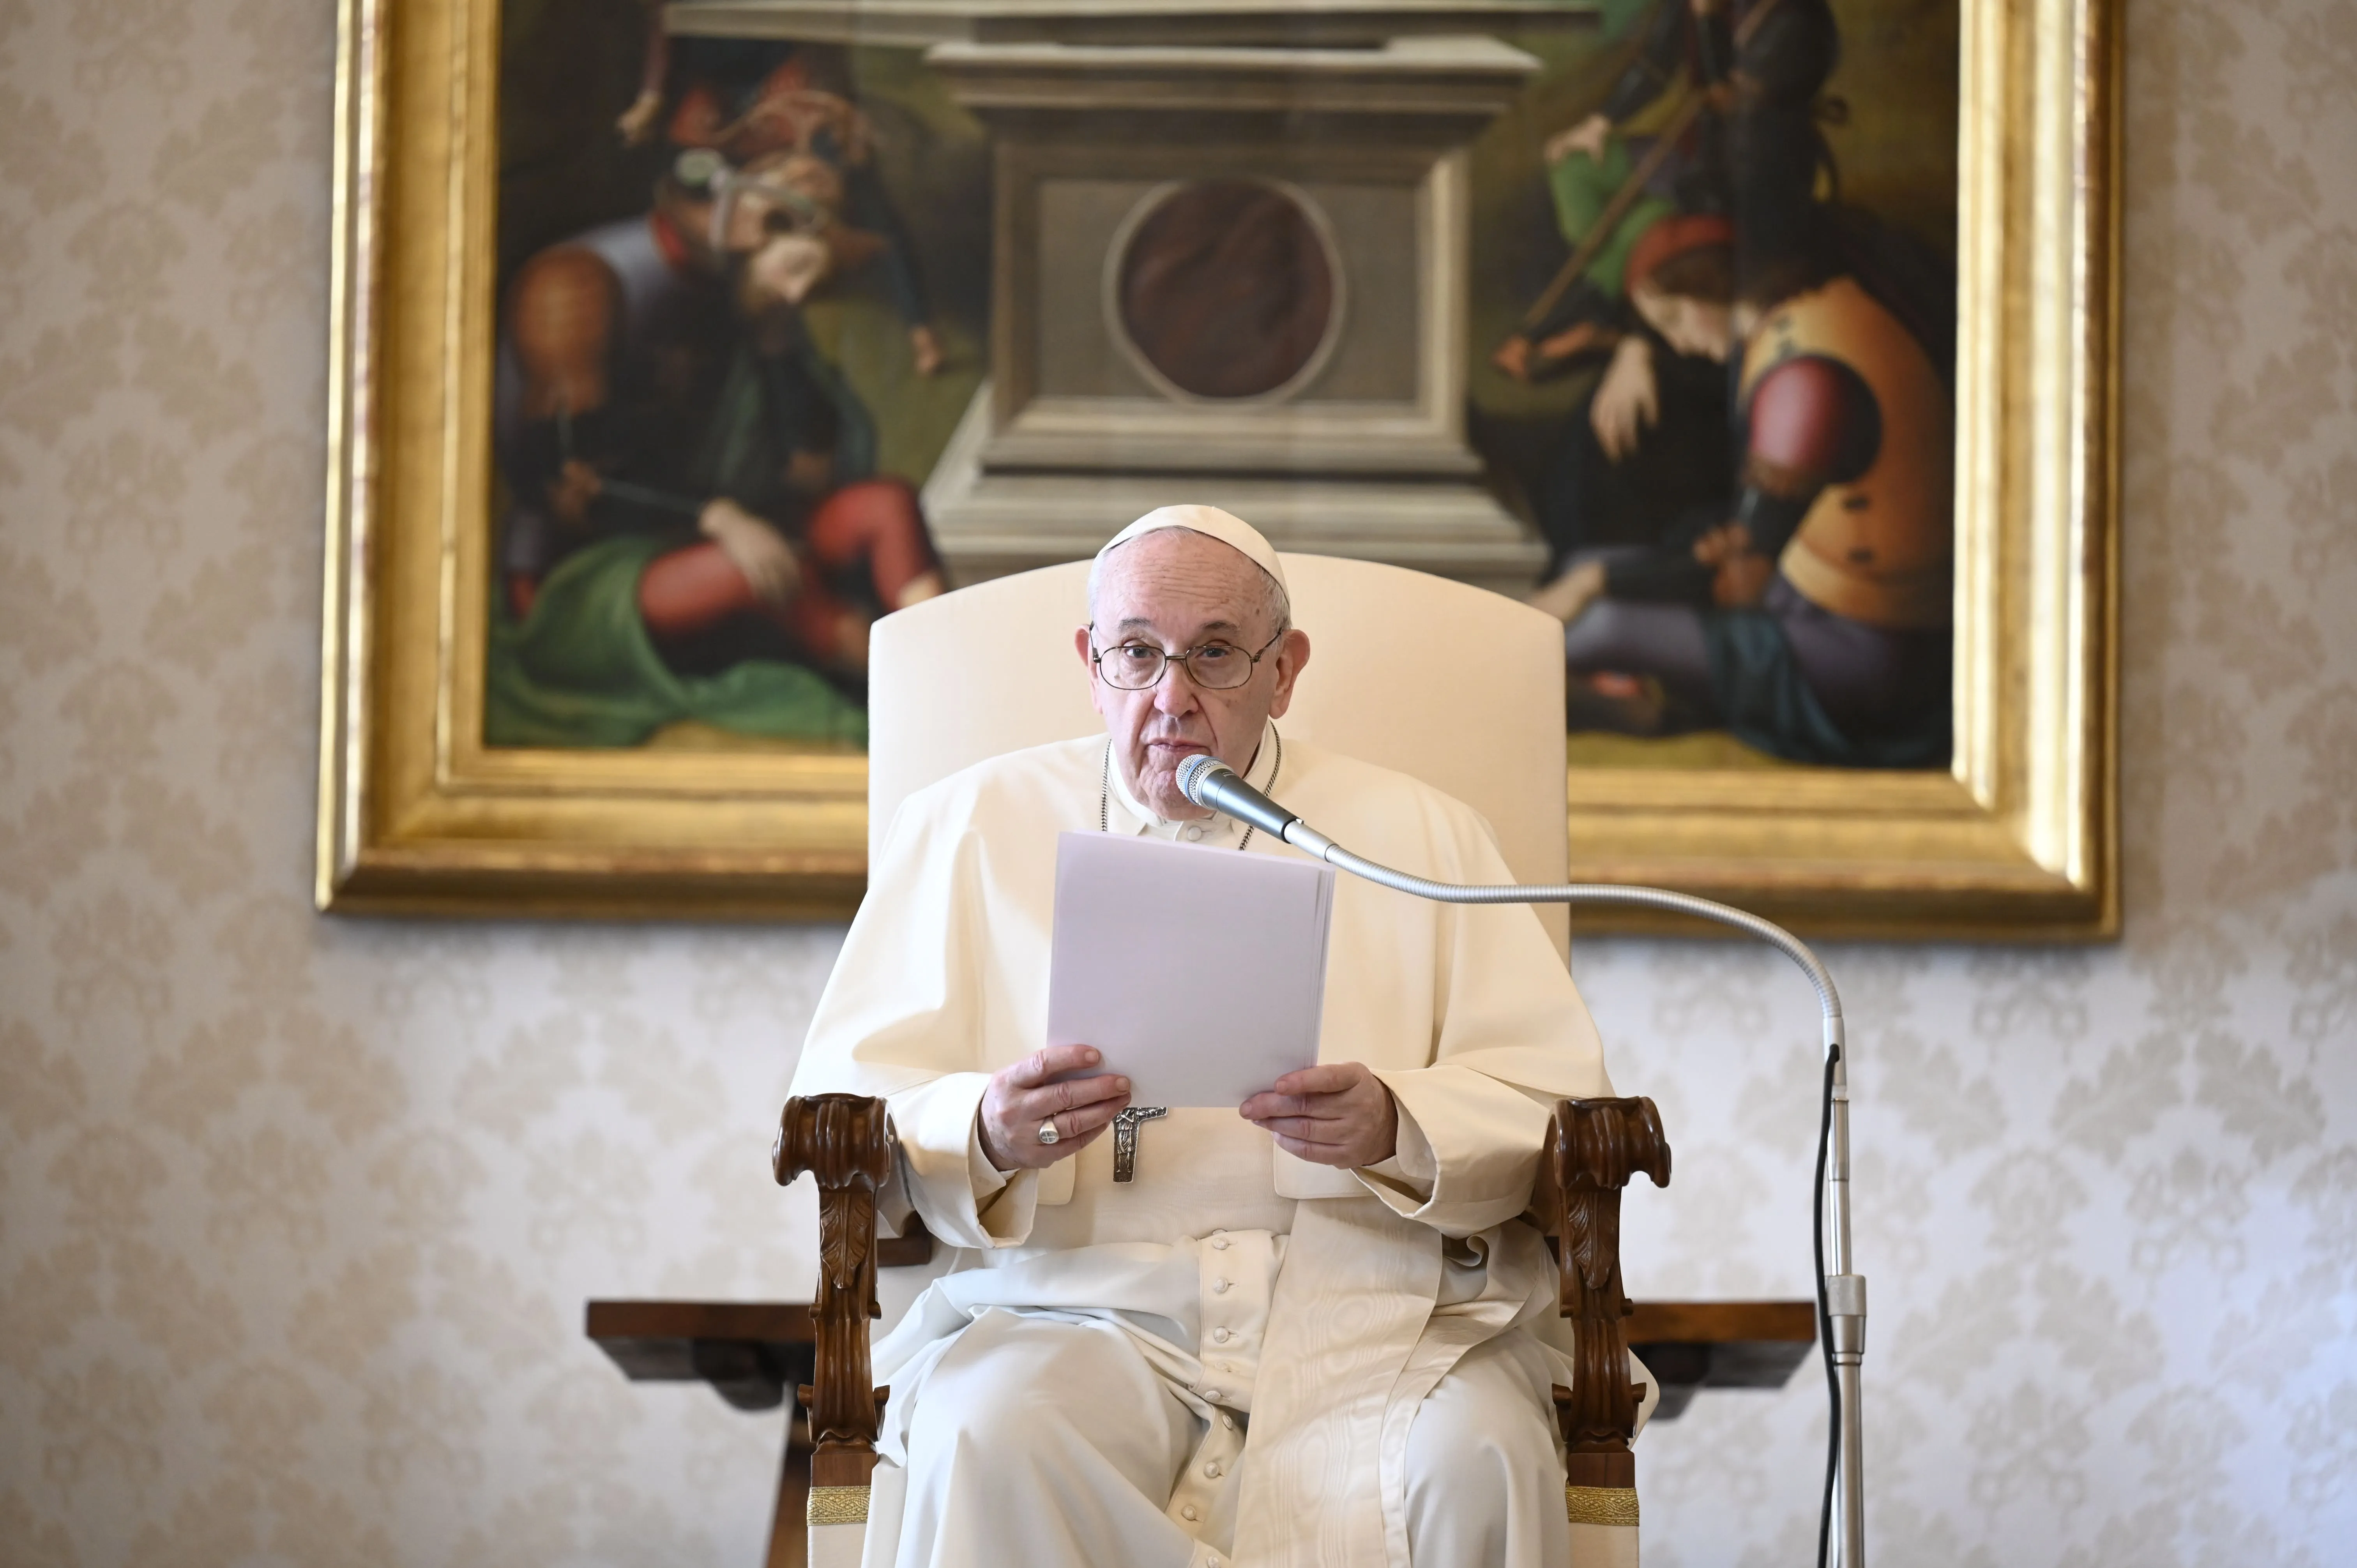 Pope Francis at his general audience address in the library of the Apostolic Palace Nov. 18, 2020. ?w=200&h=150